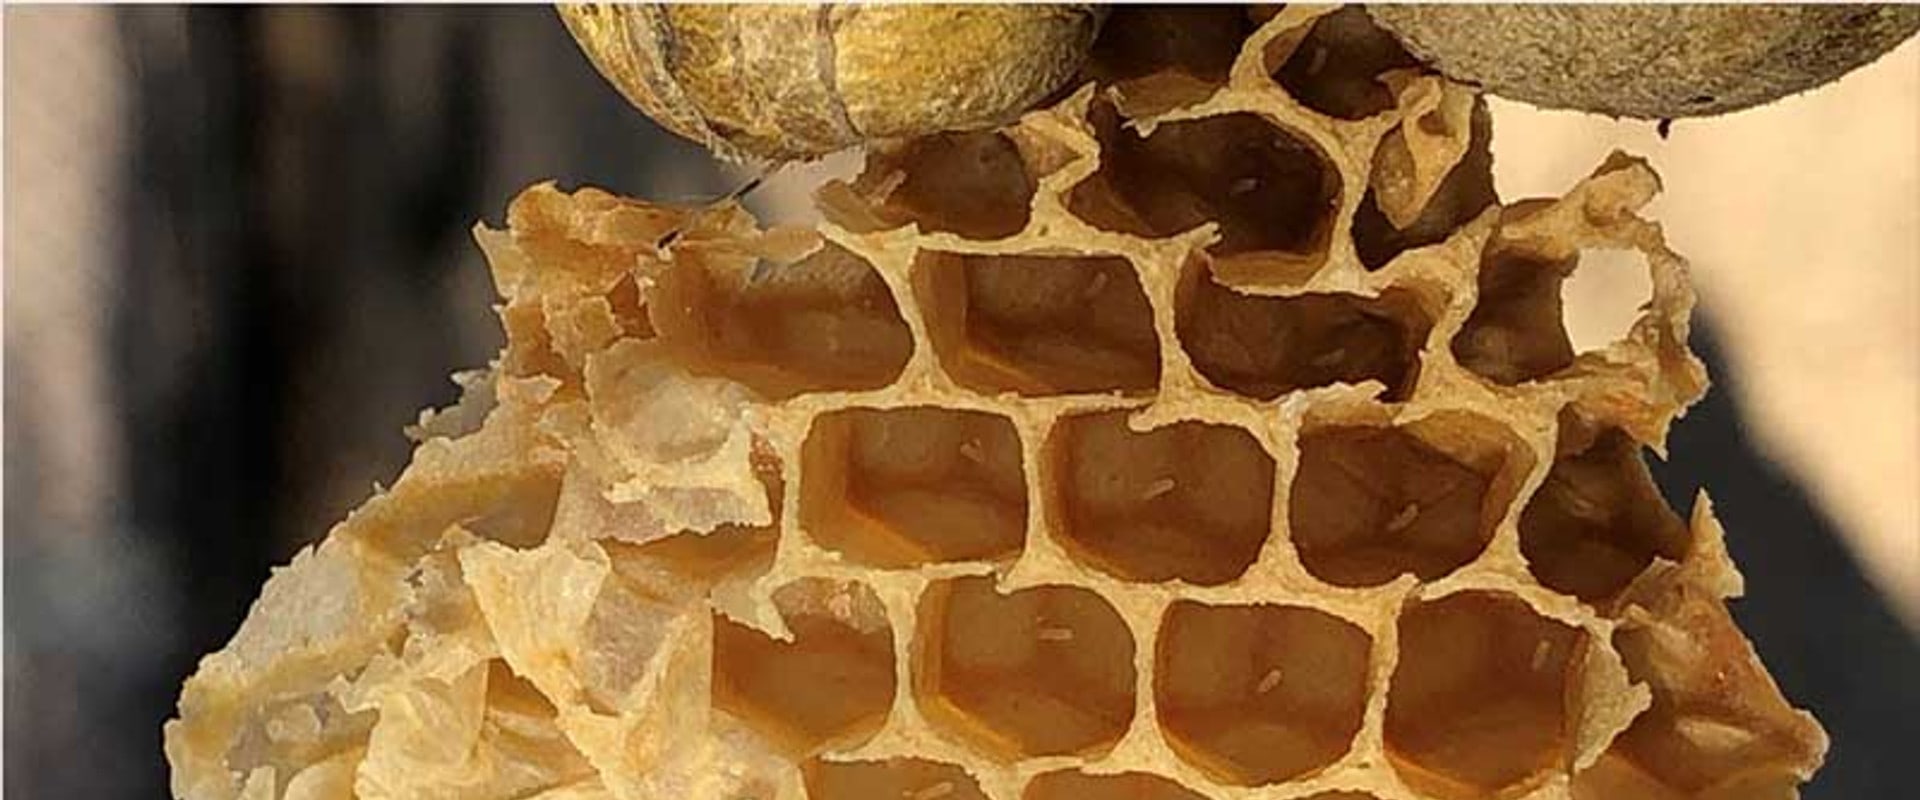 Bee Products for Skincare: Discover the Benefits of Beekeeping